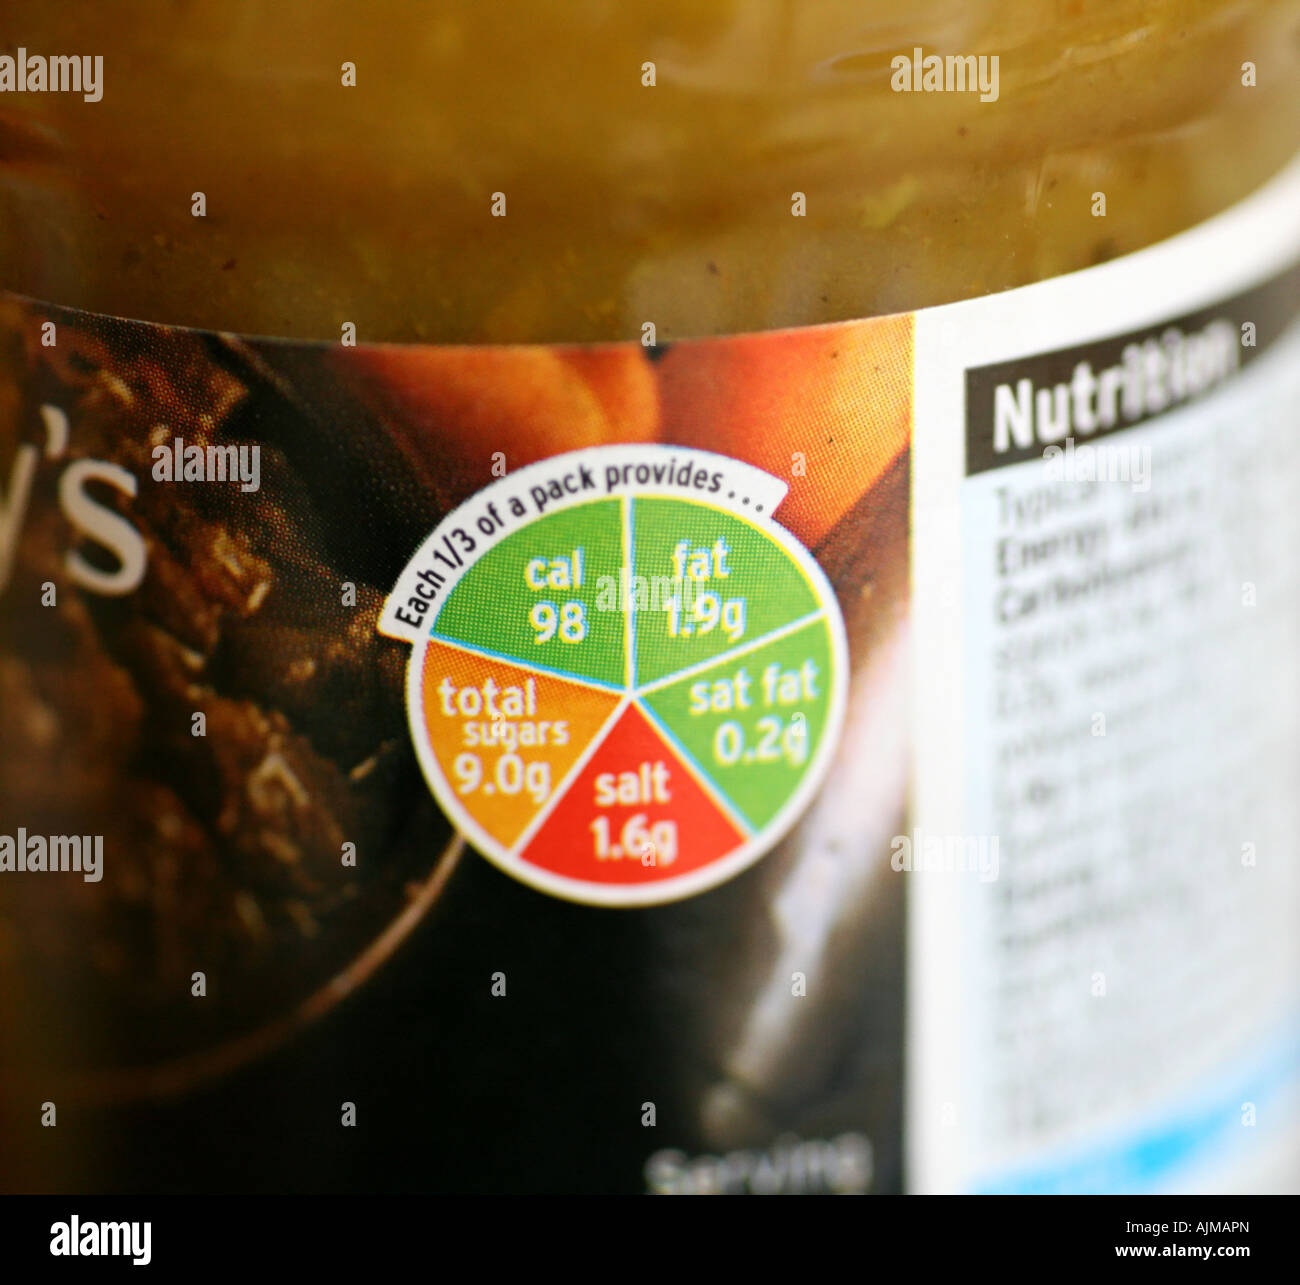 nutritional information label Stock Photo